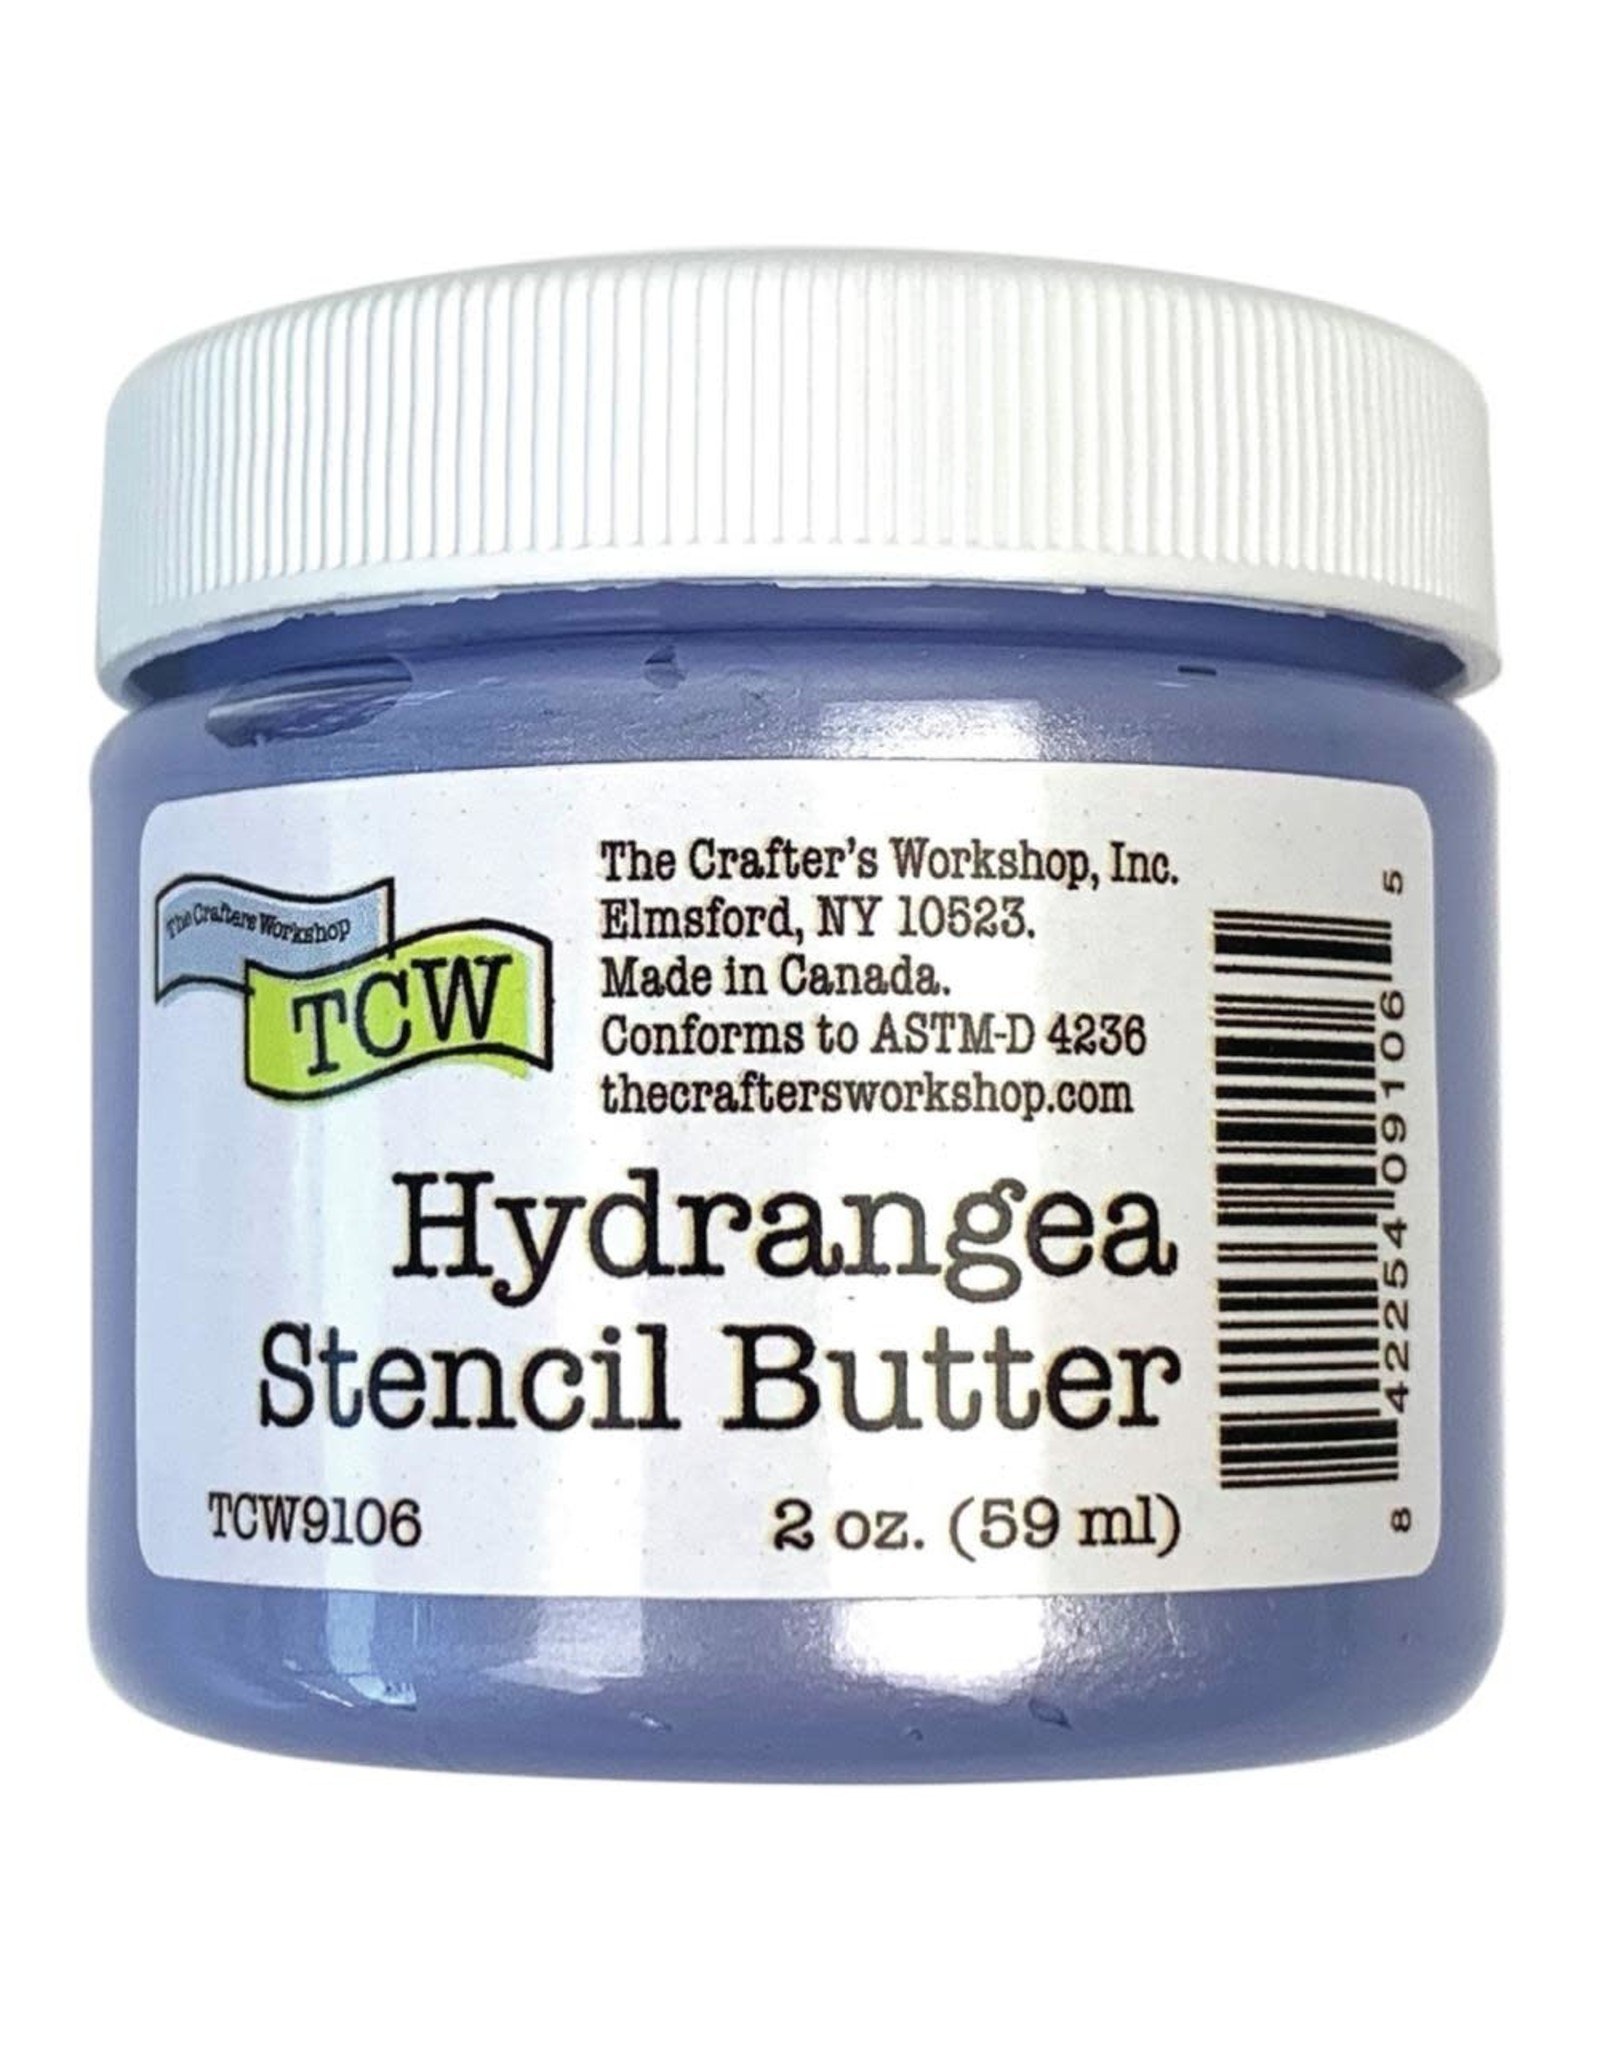 CRAFTERS WORKSHOP THE CRAFTERS WORKSHOP HYDRANGEA STENCIL BUTTER 2oz